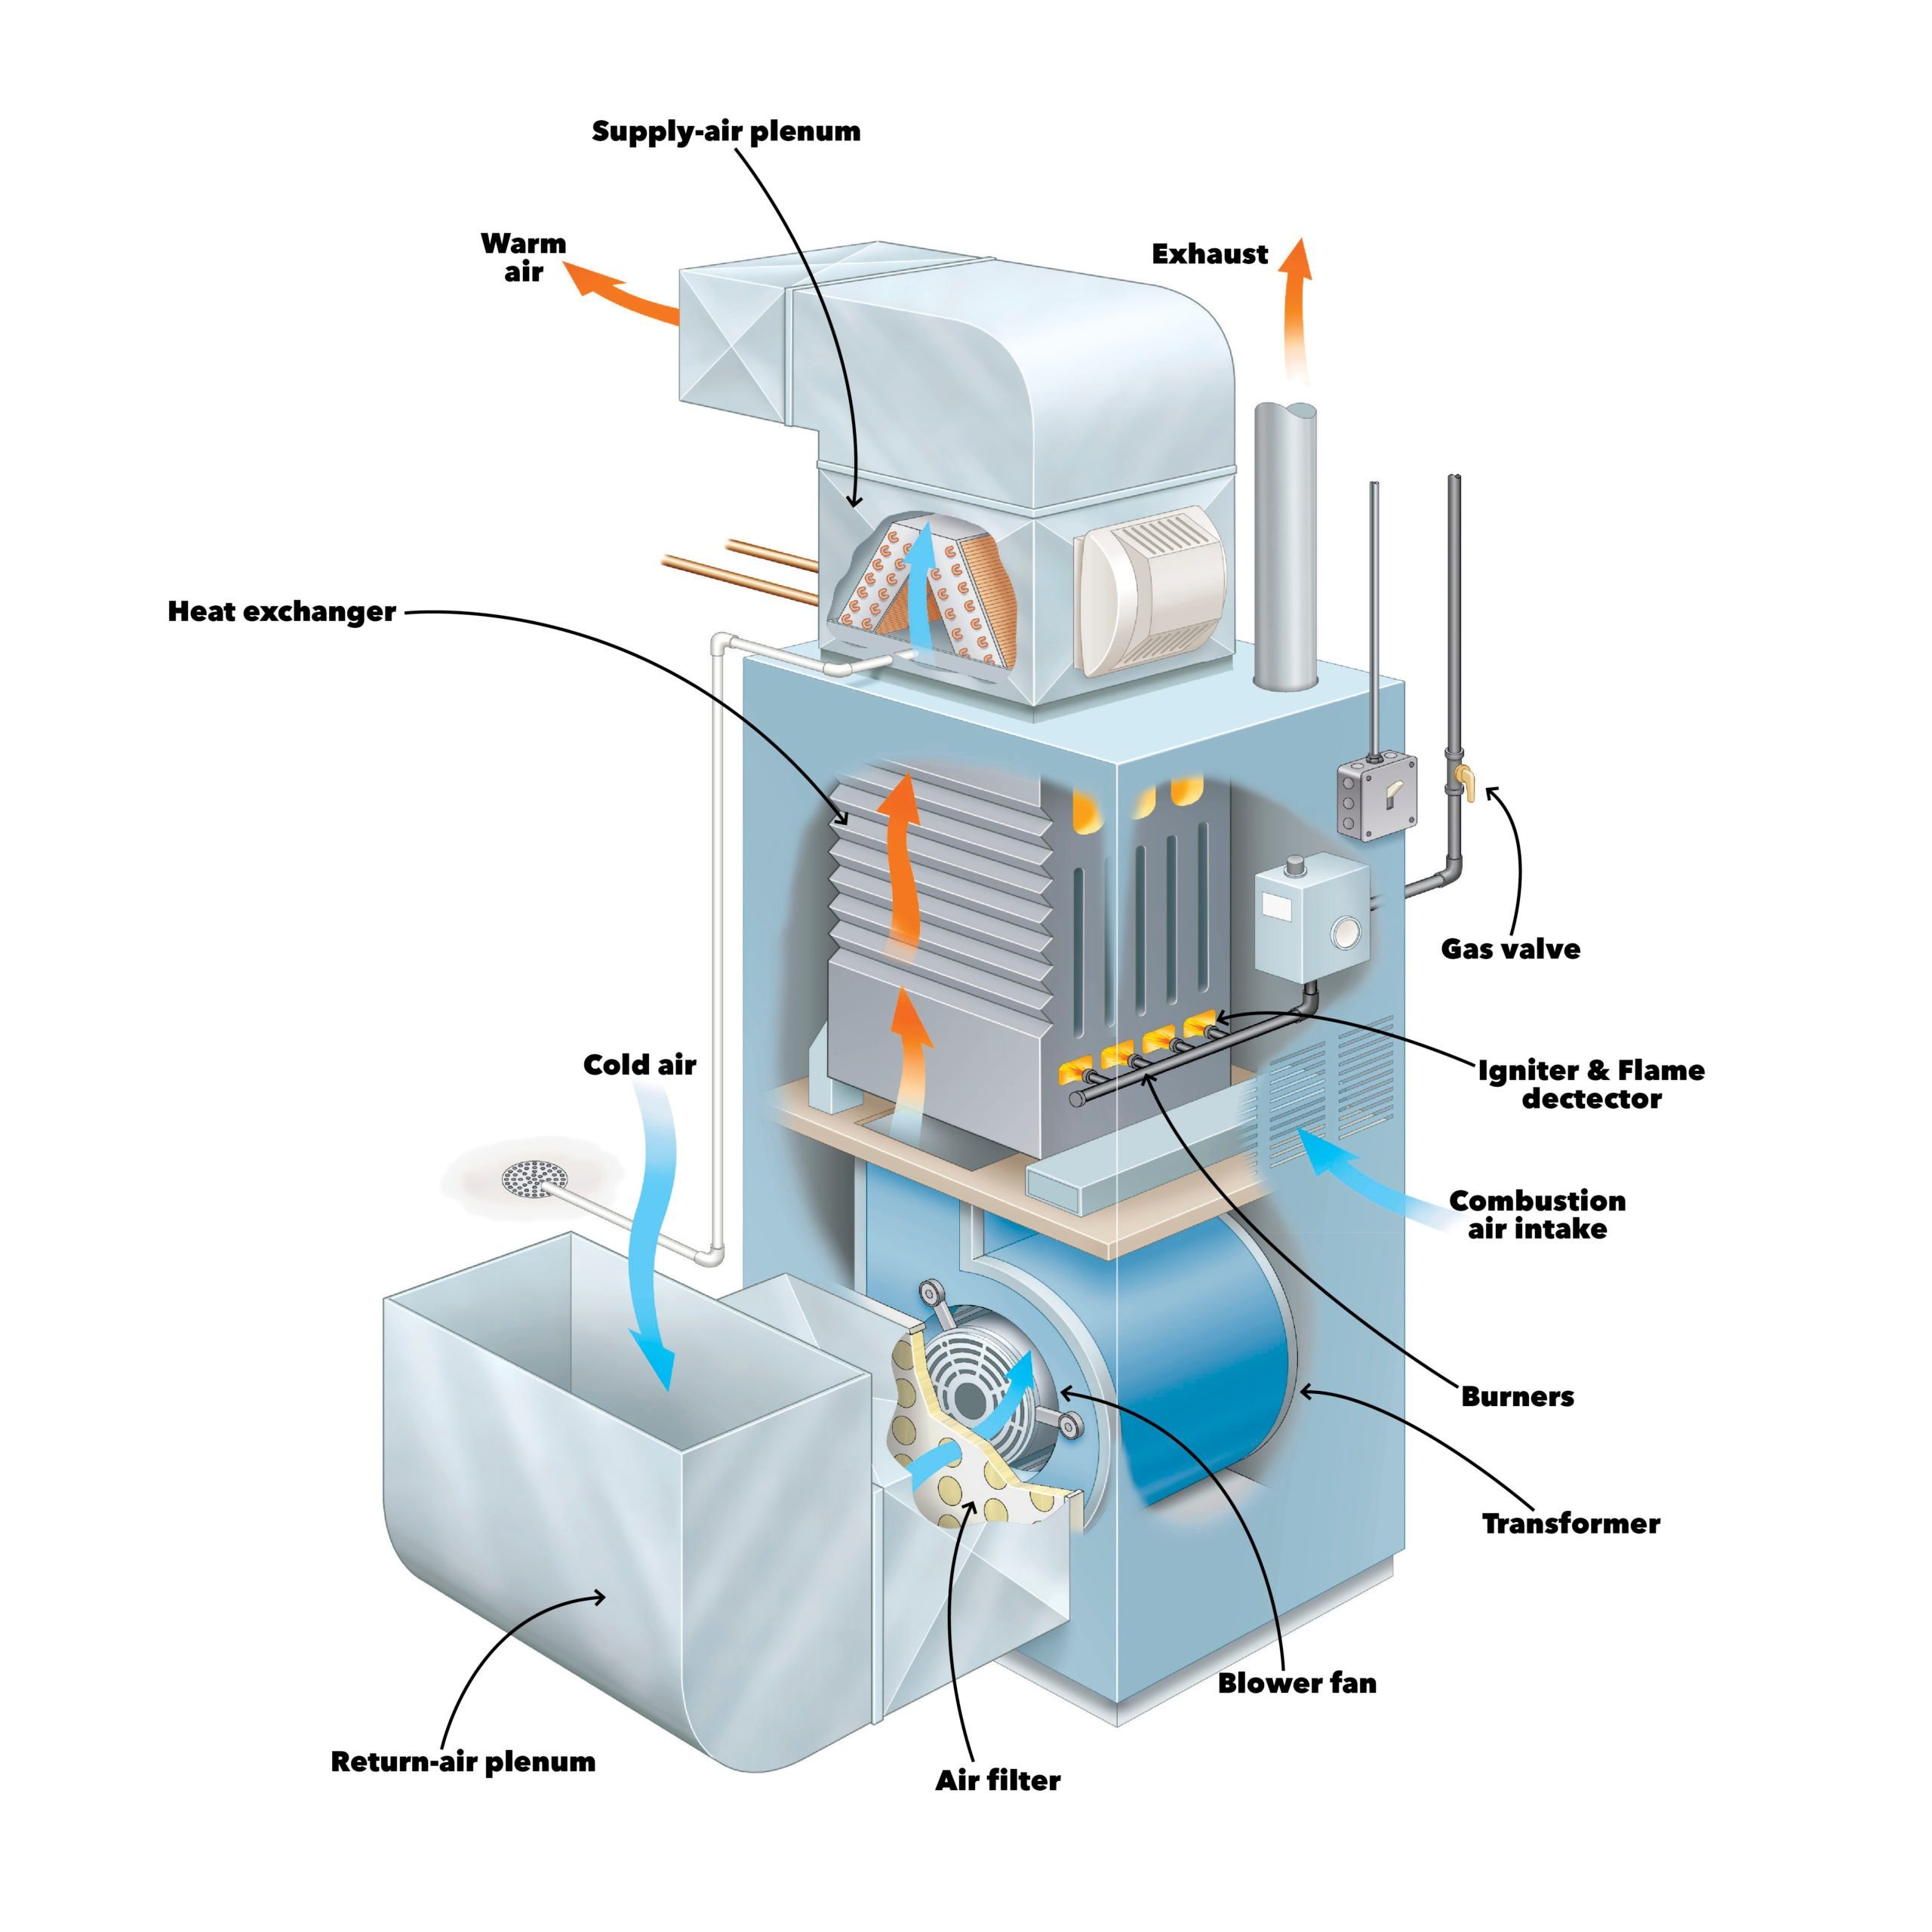 Furnaces 101 - How Gas Furnaces Work